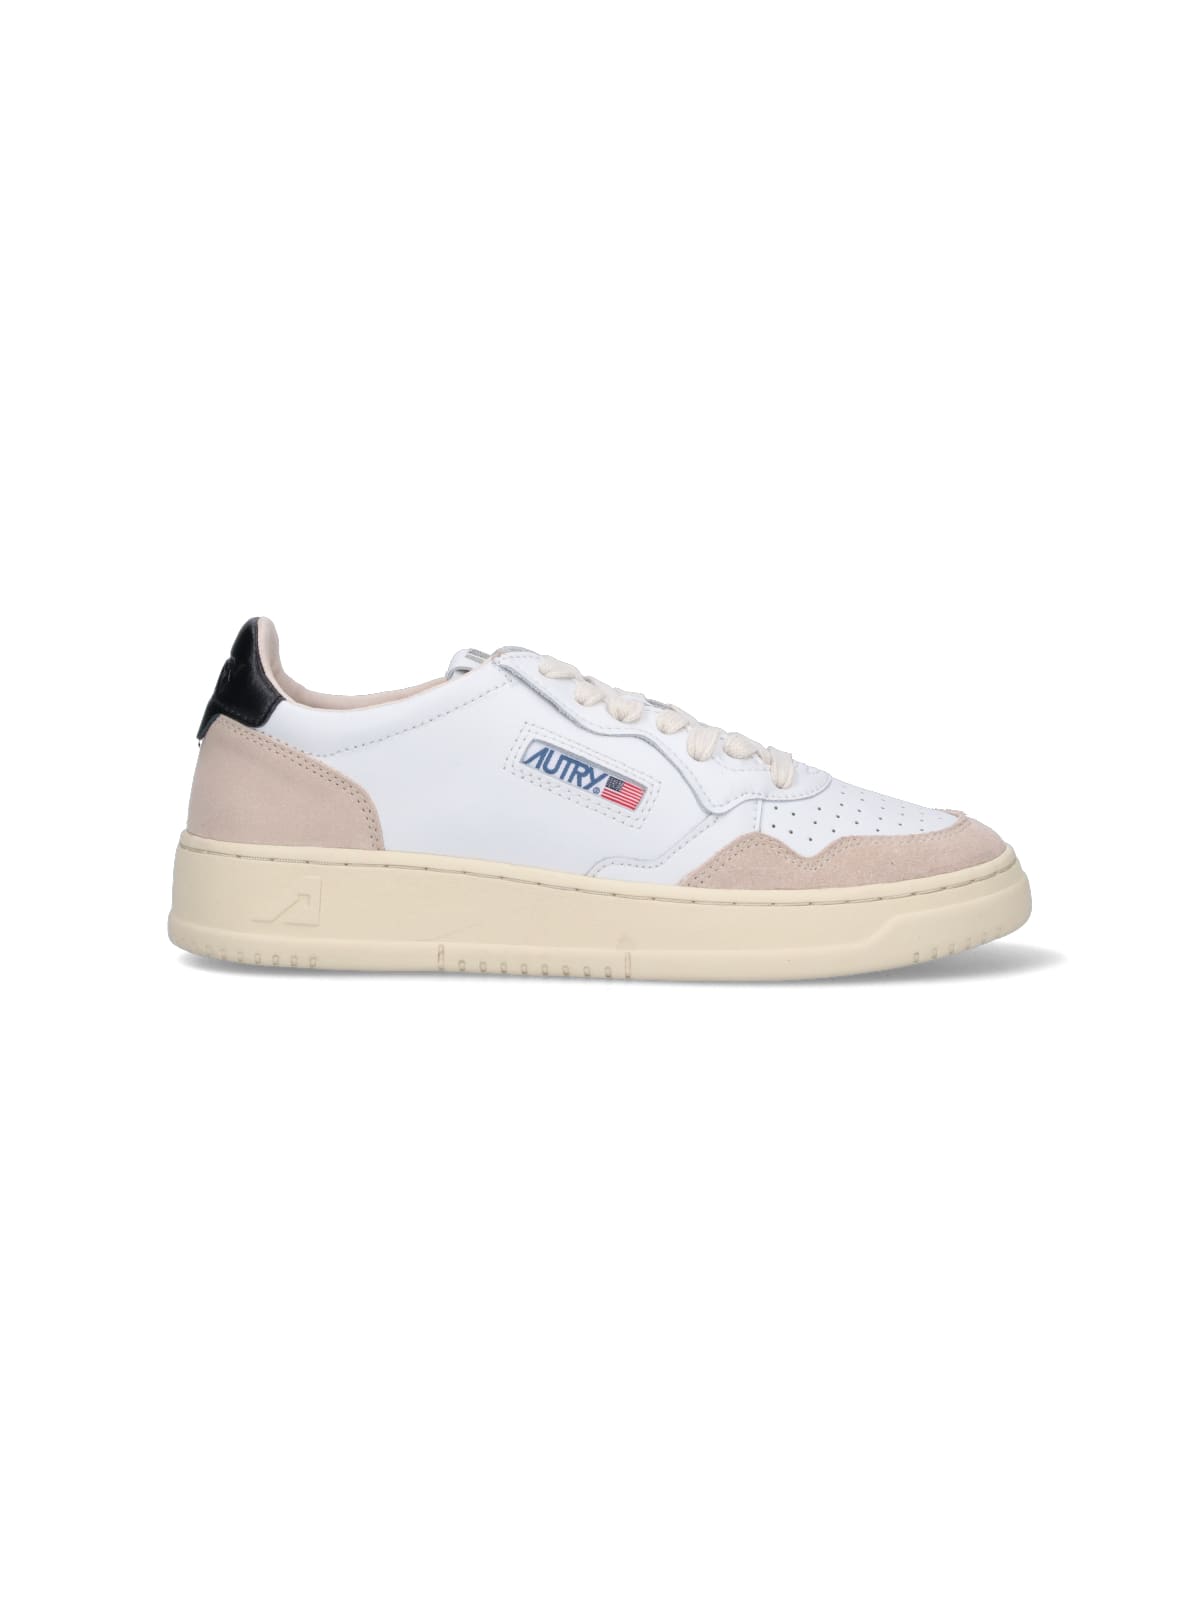 Shop Autry Low Medalist Sneakers In Leat Suede Wht Blk